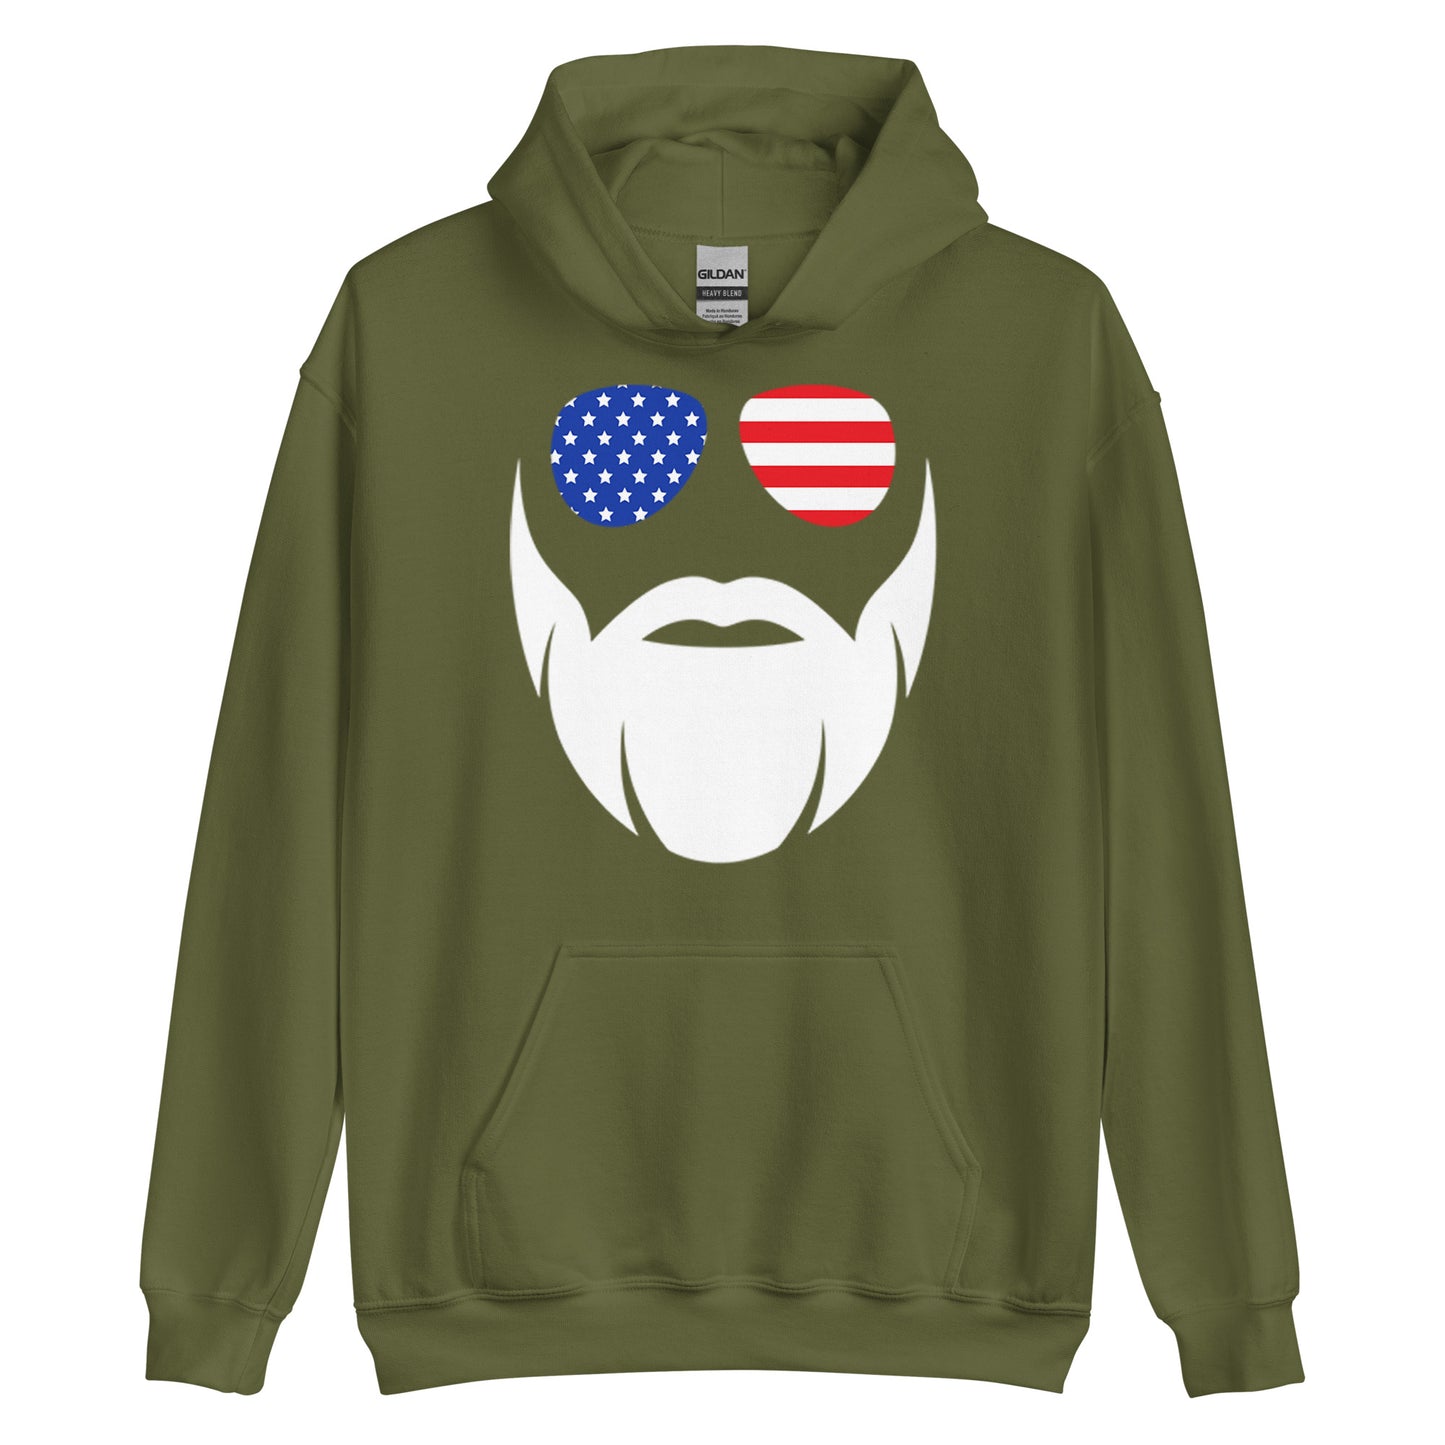 Papa Swolio for President Hoodie